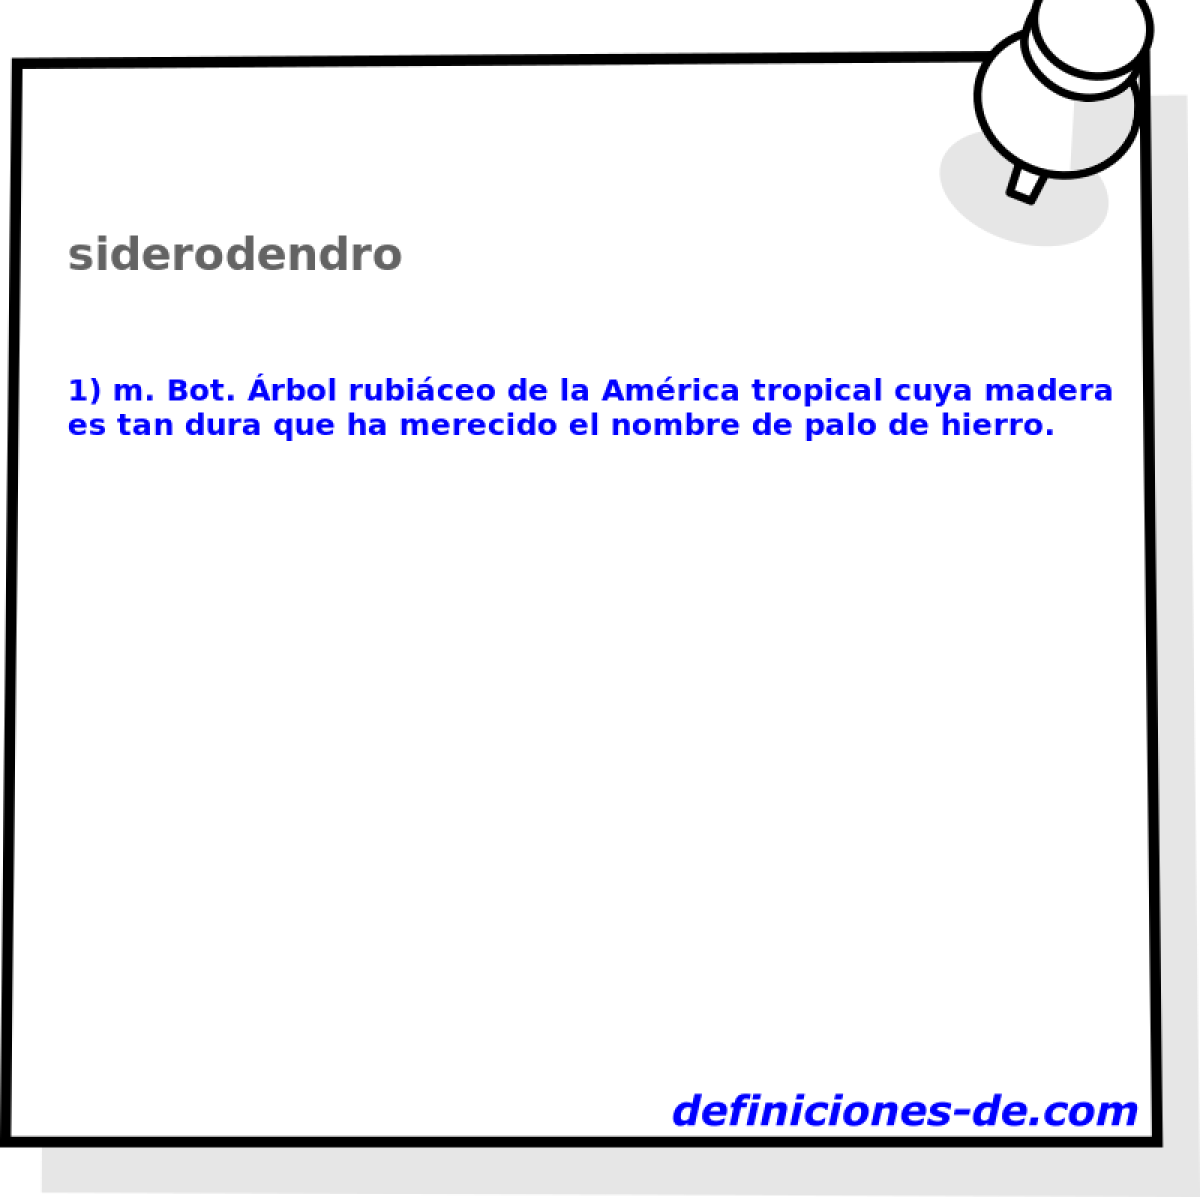 siderodendro 